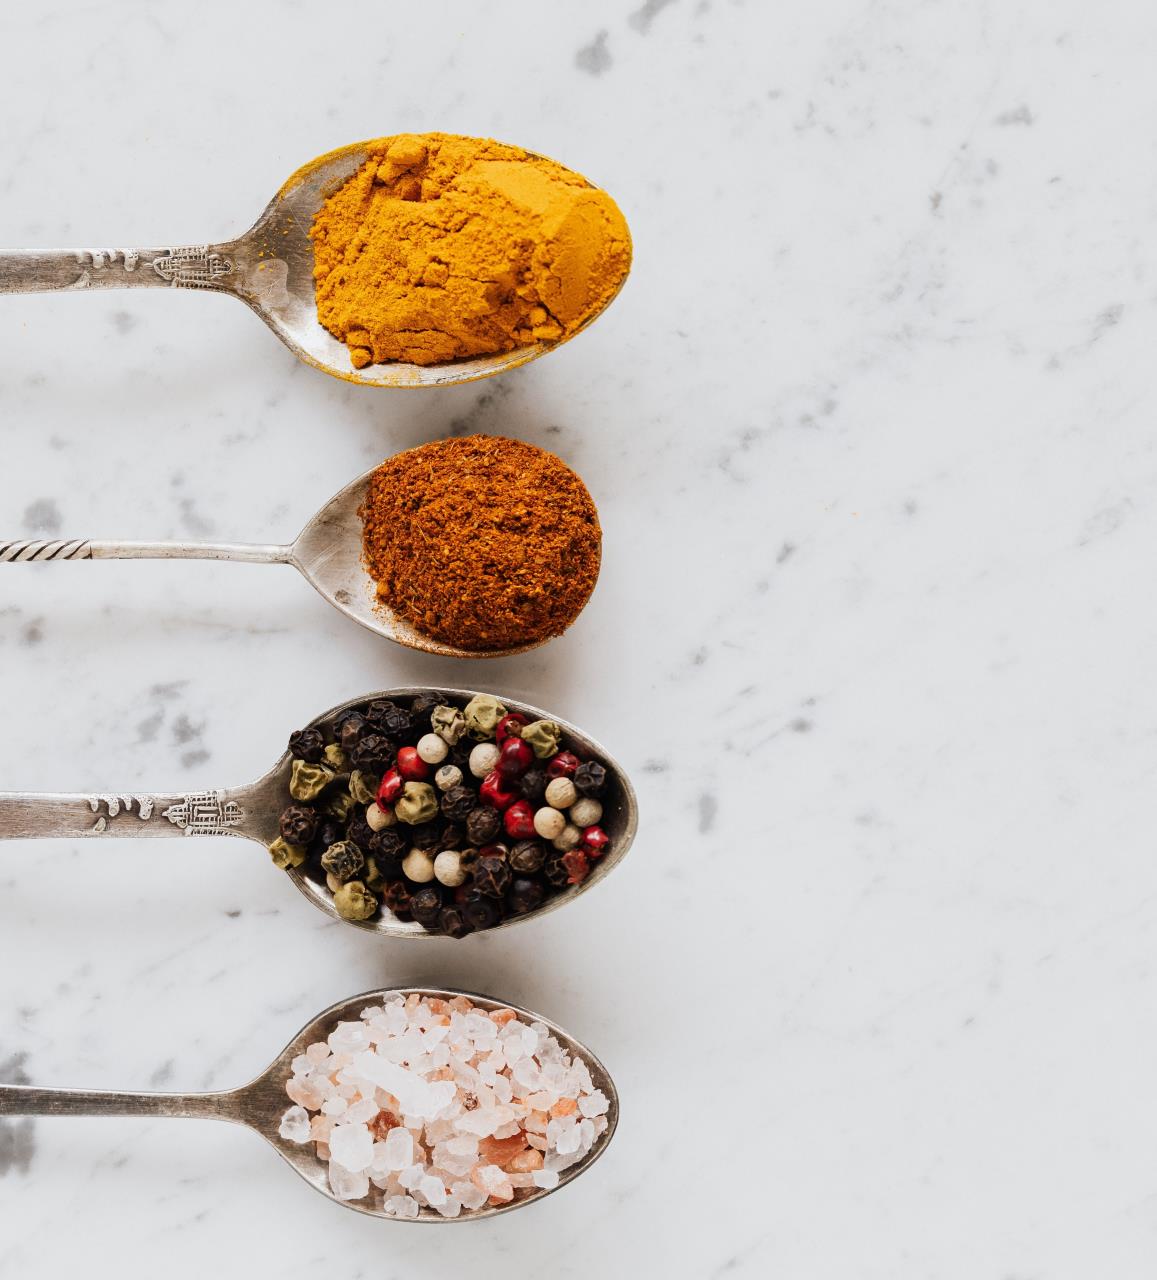 Savoury Salts and Spice Rubs - A Zero Waste Workshop with Michelle Kays